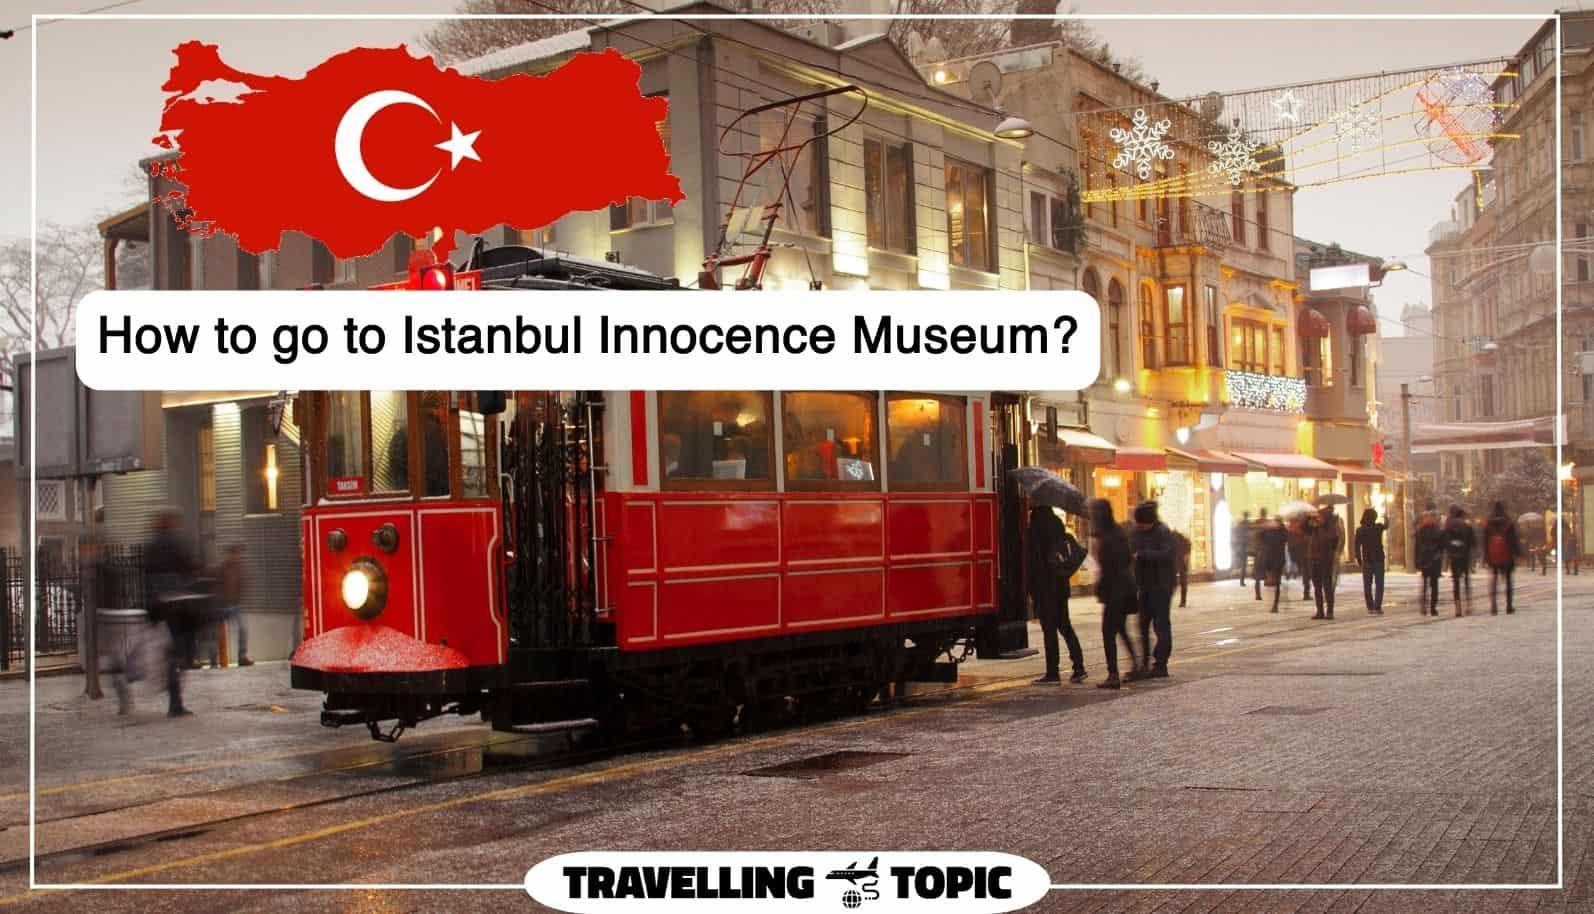 How to go to Istanbul Innocence Museum?